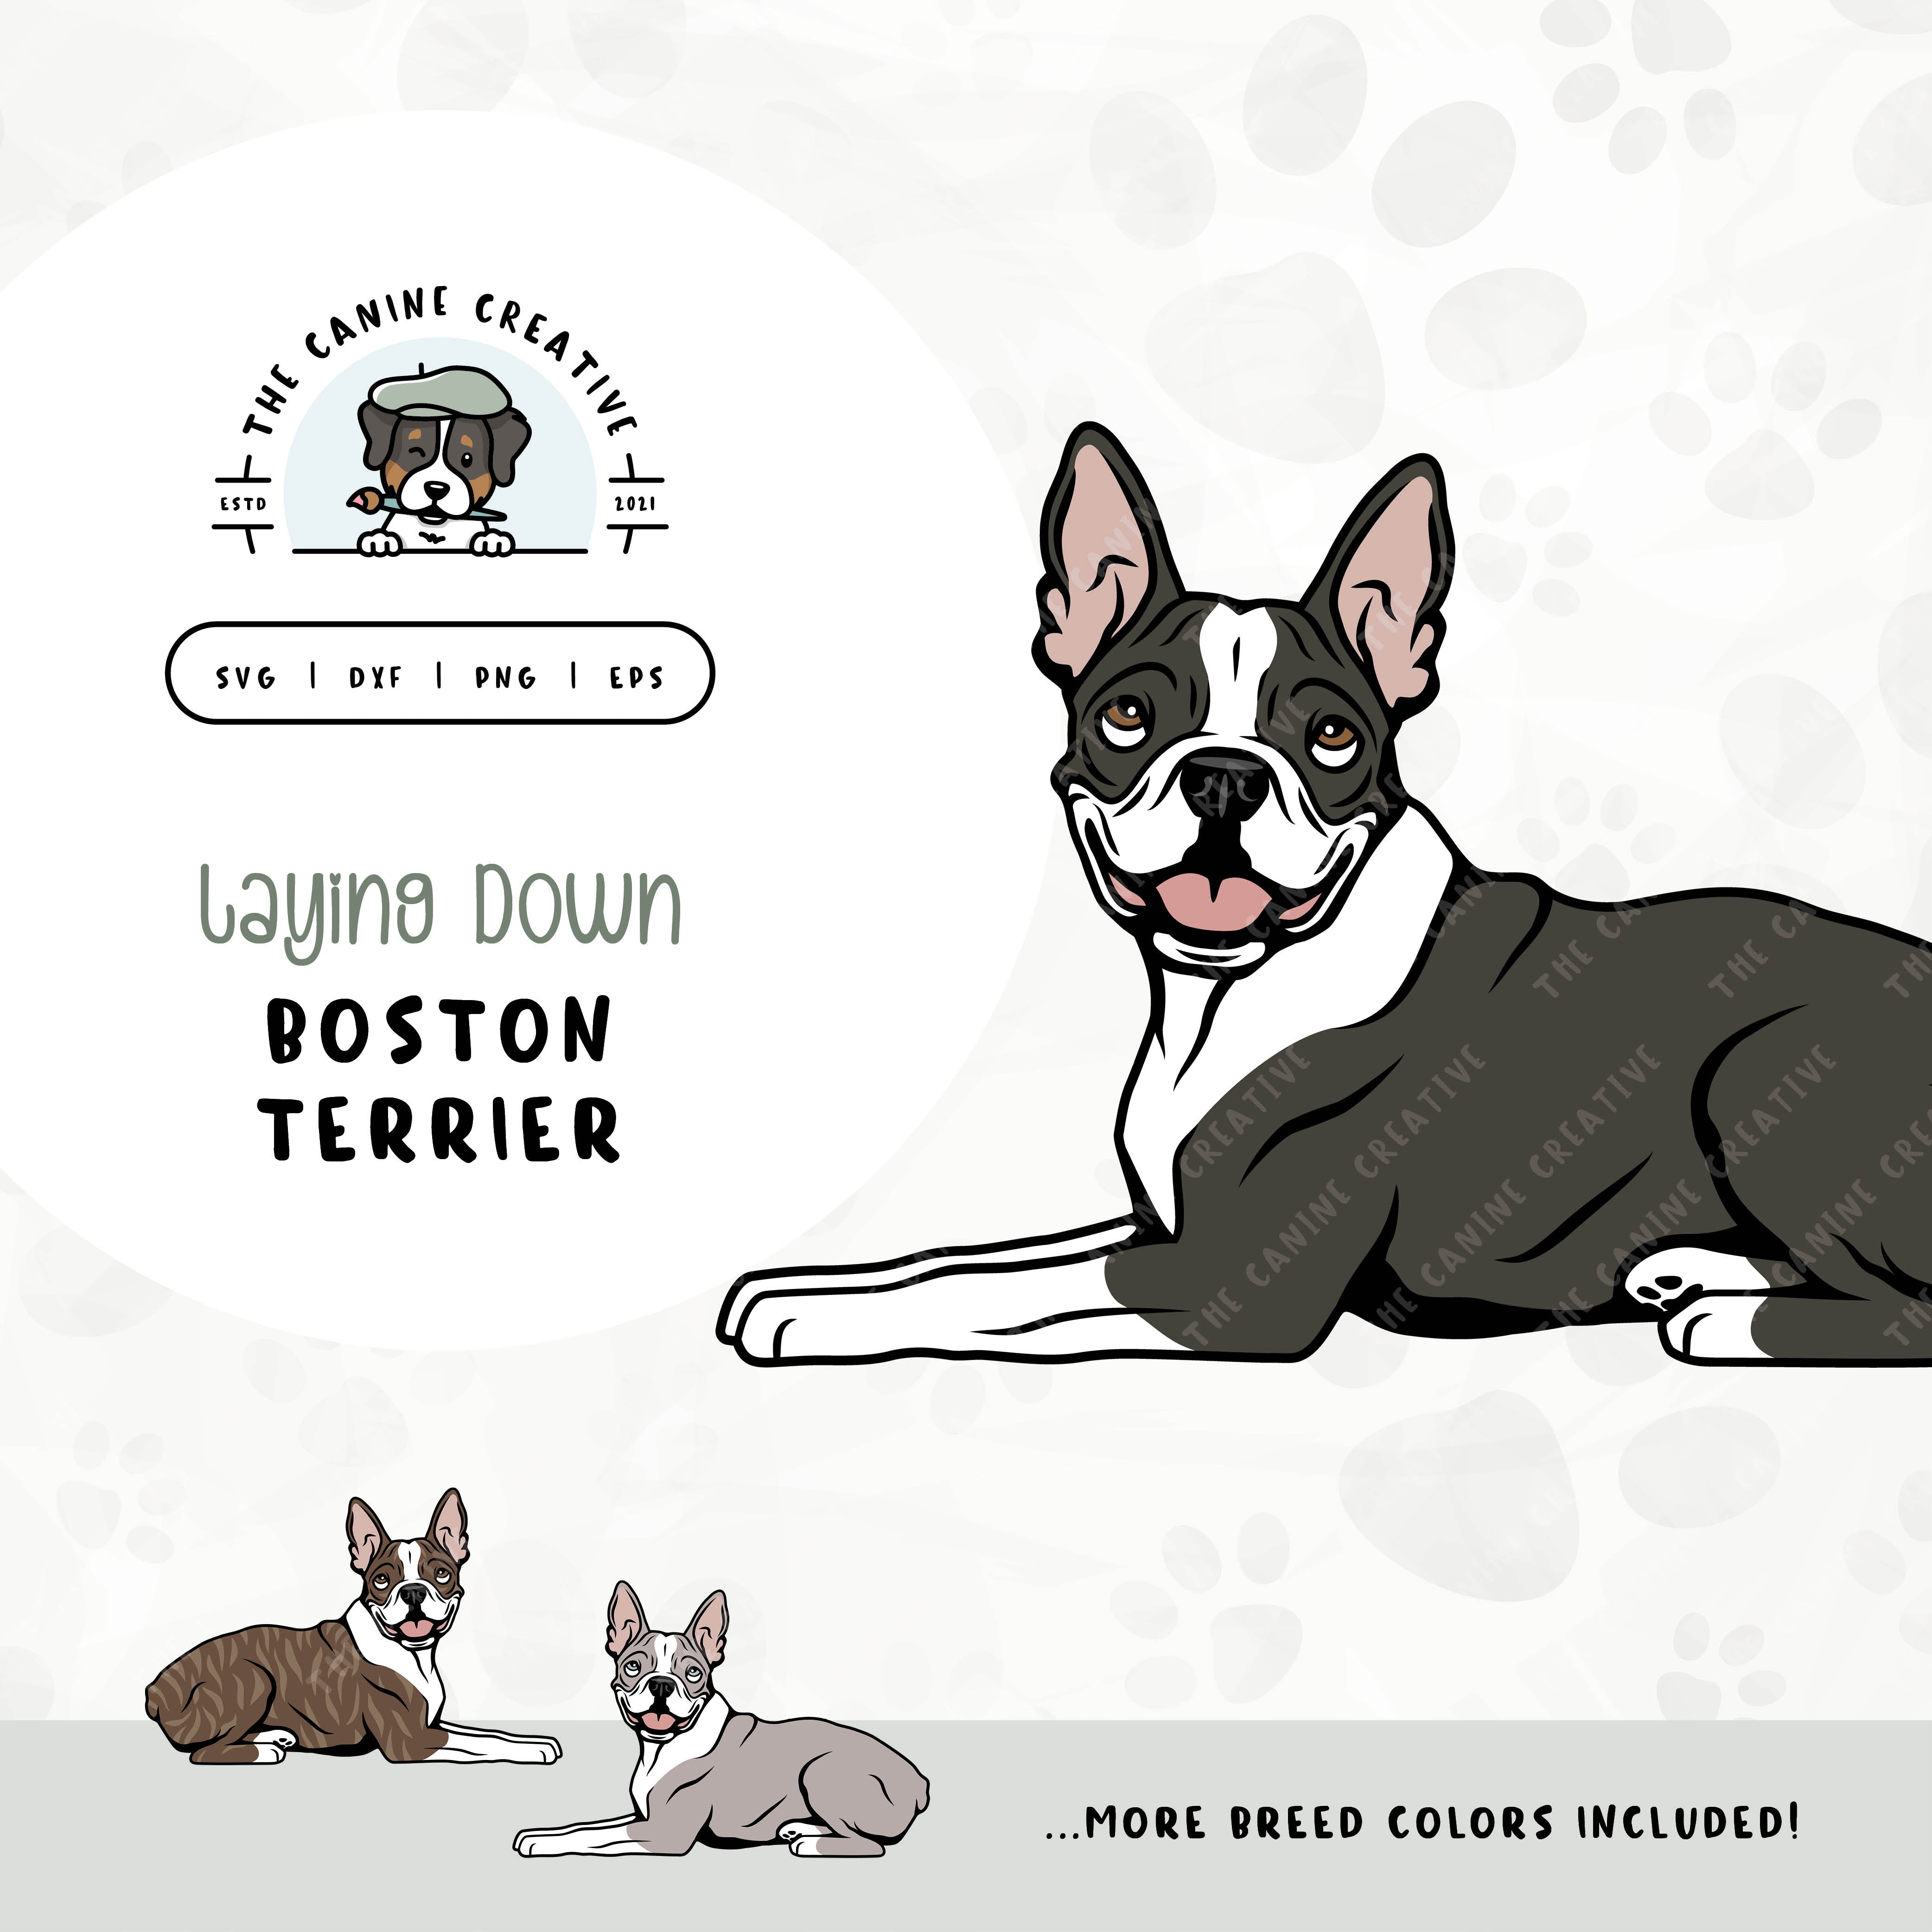 This laying down dog design features a Boston Terrier. File formats include: SVG, DXF, PNG, and EPS.